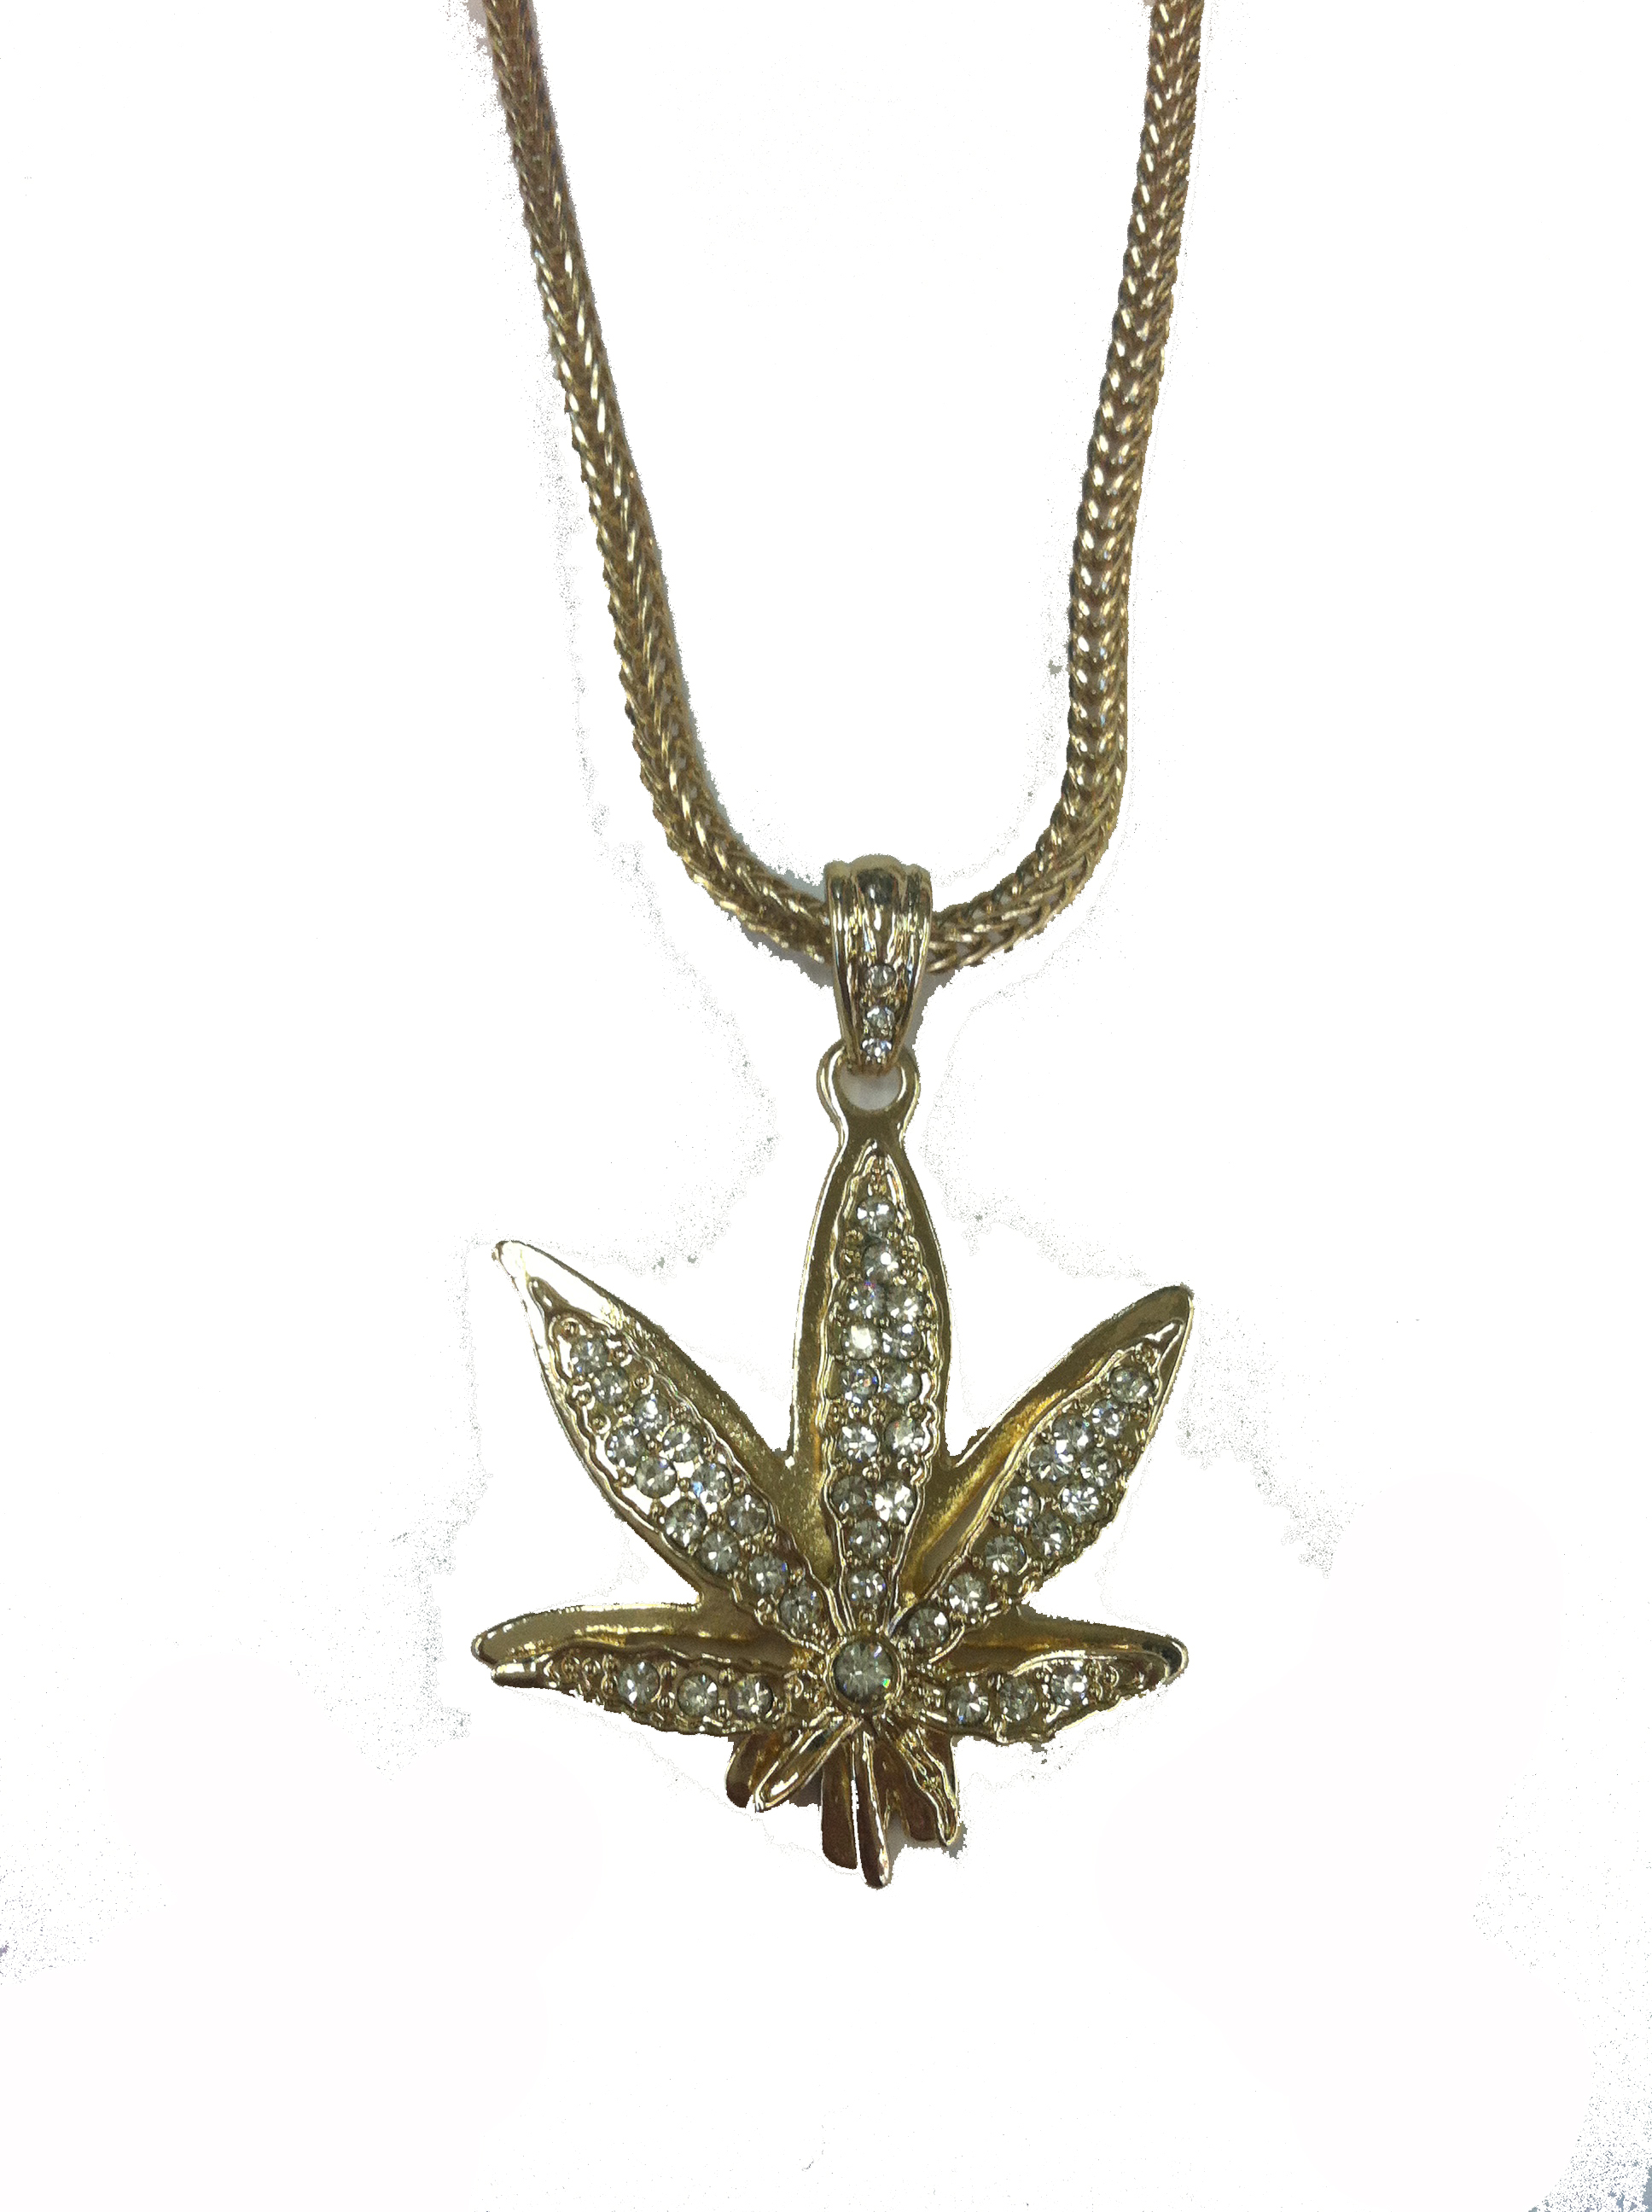 Weed Plant chain 1